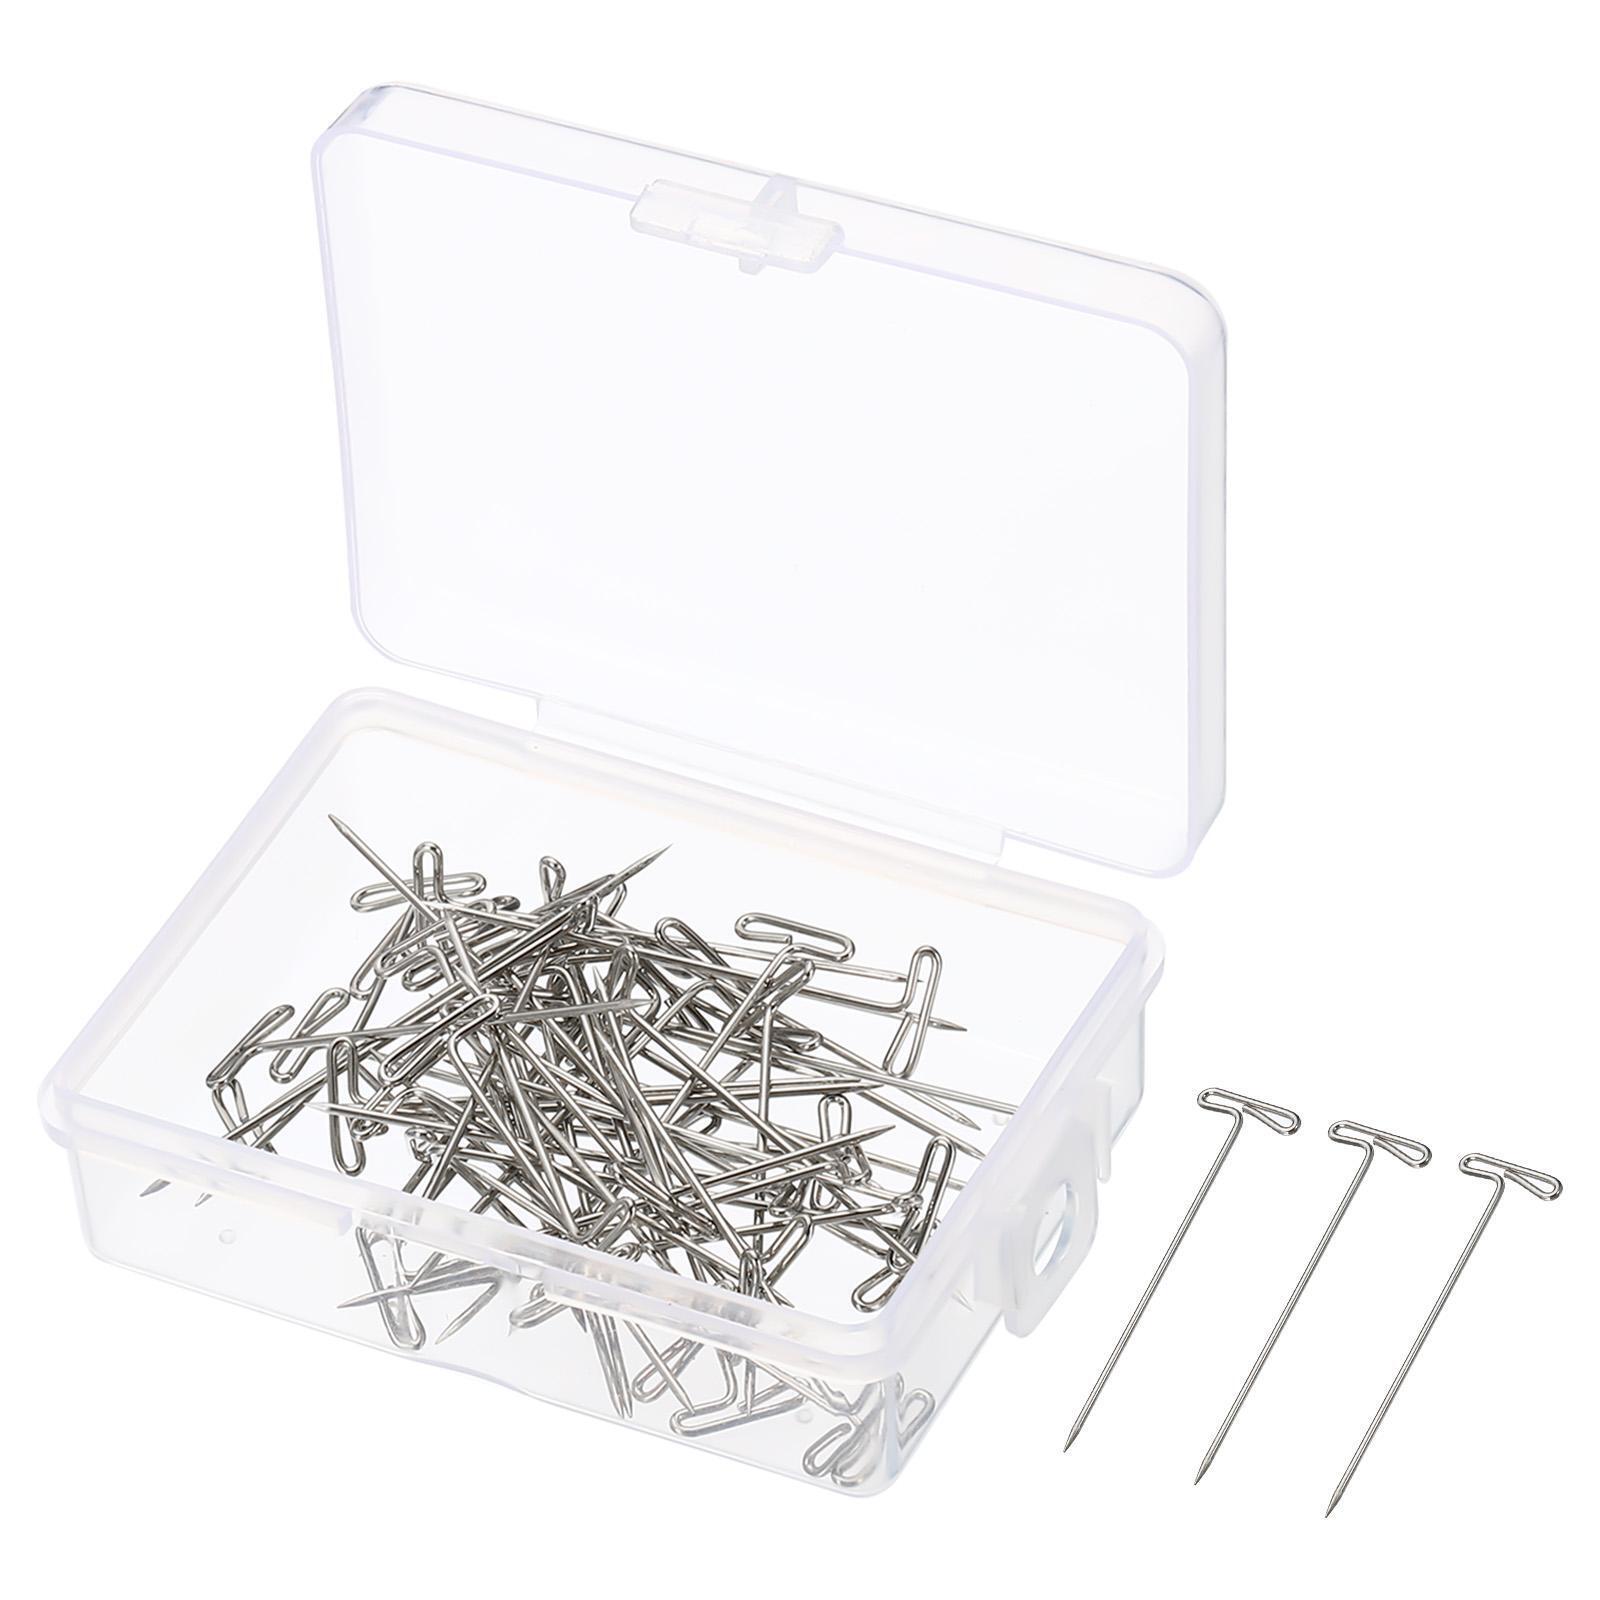 50pcs 1.5 Inch T-pins, Stainless Blocking Pin Needles For Knitting, Silver